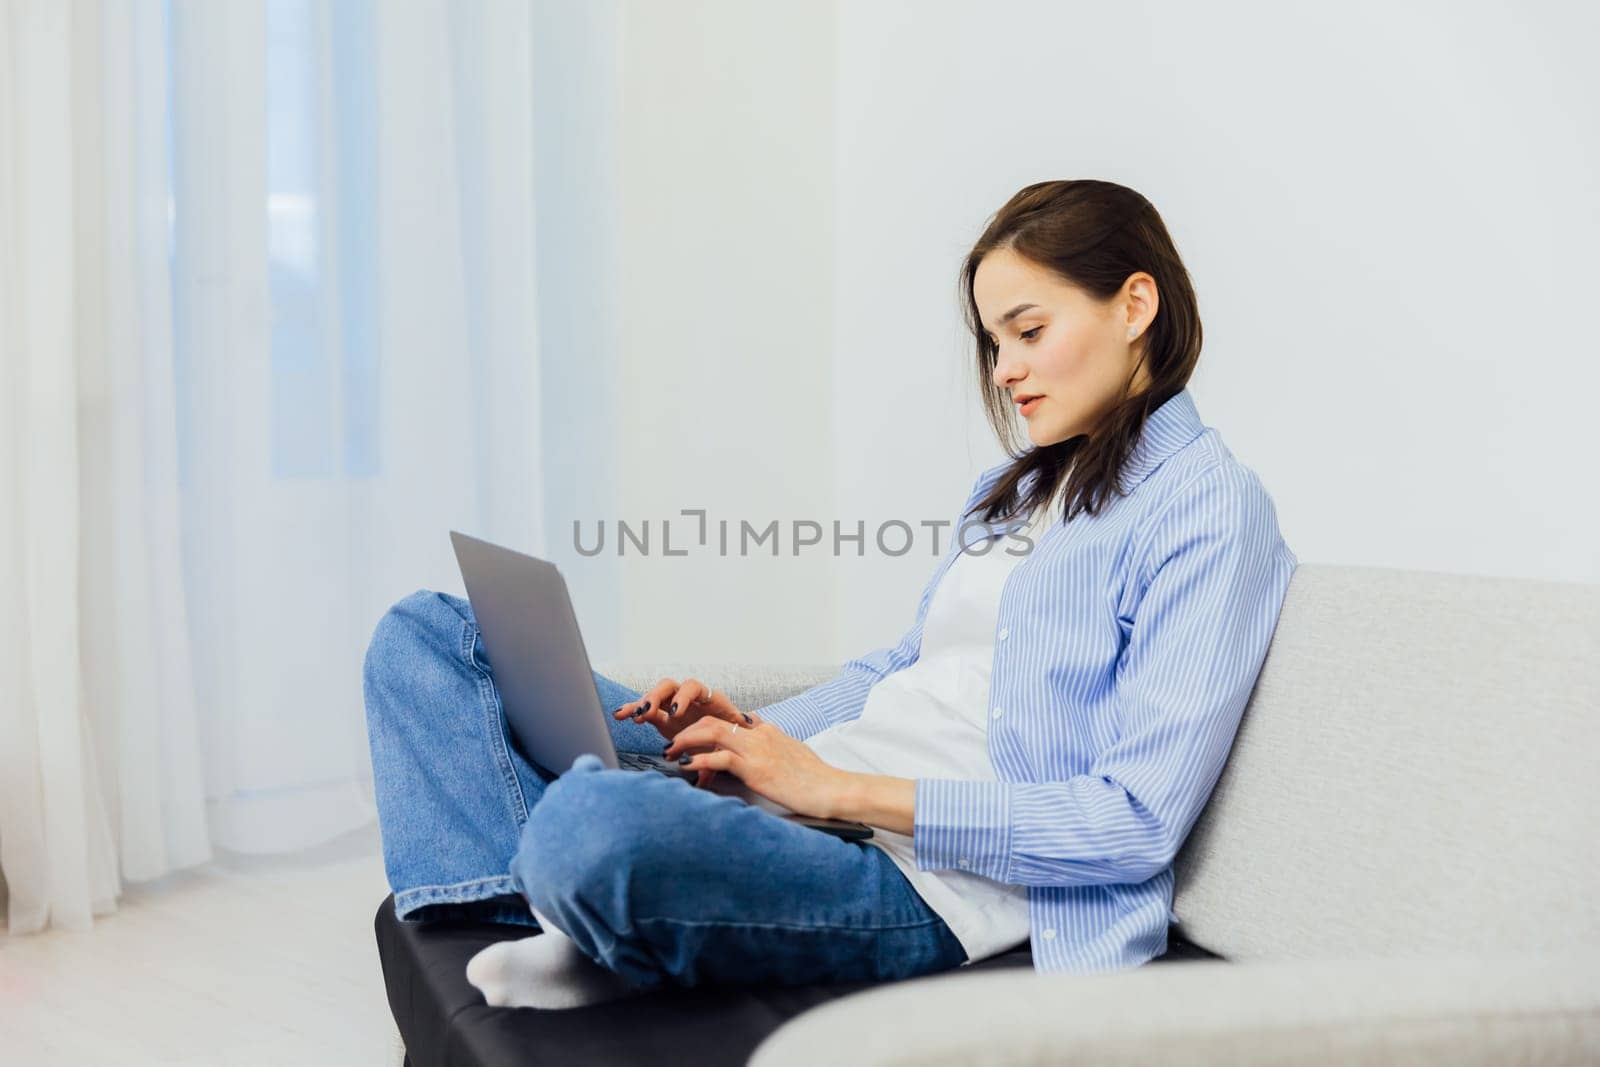 a woman works at a laptop computer in the room remote work conversation on skype internet online communication